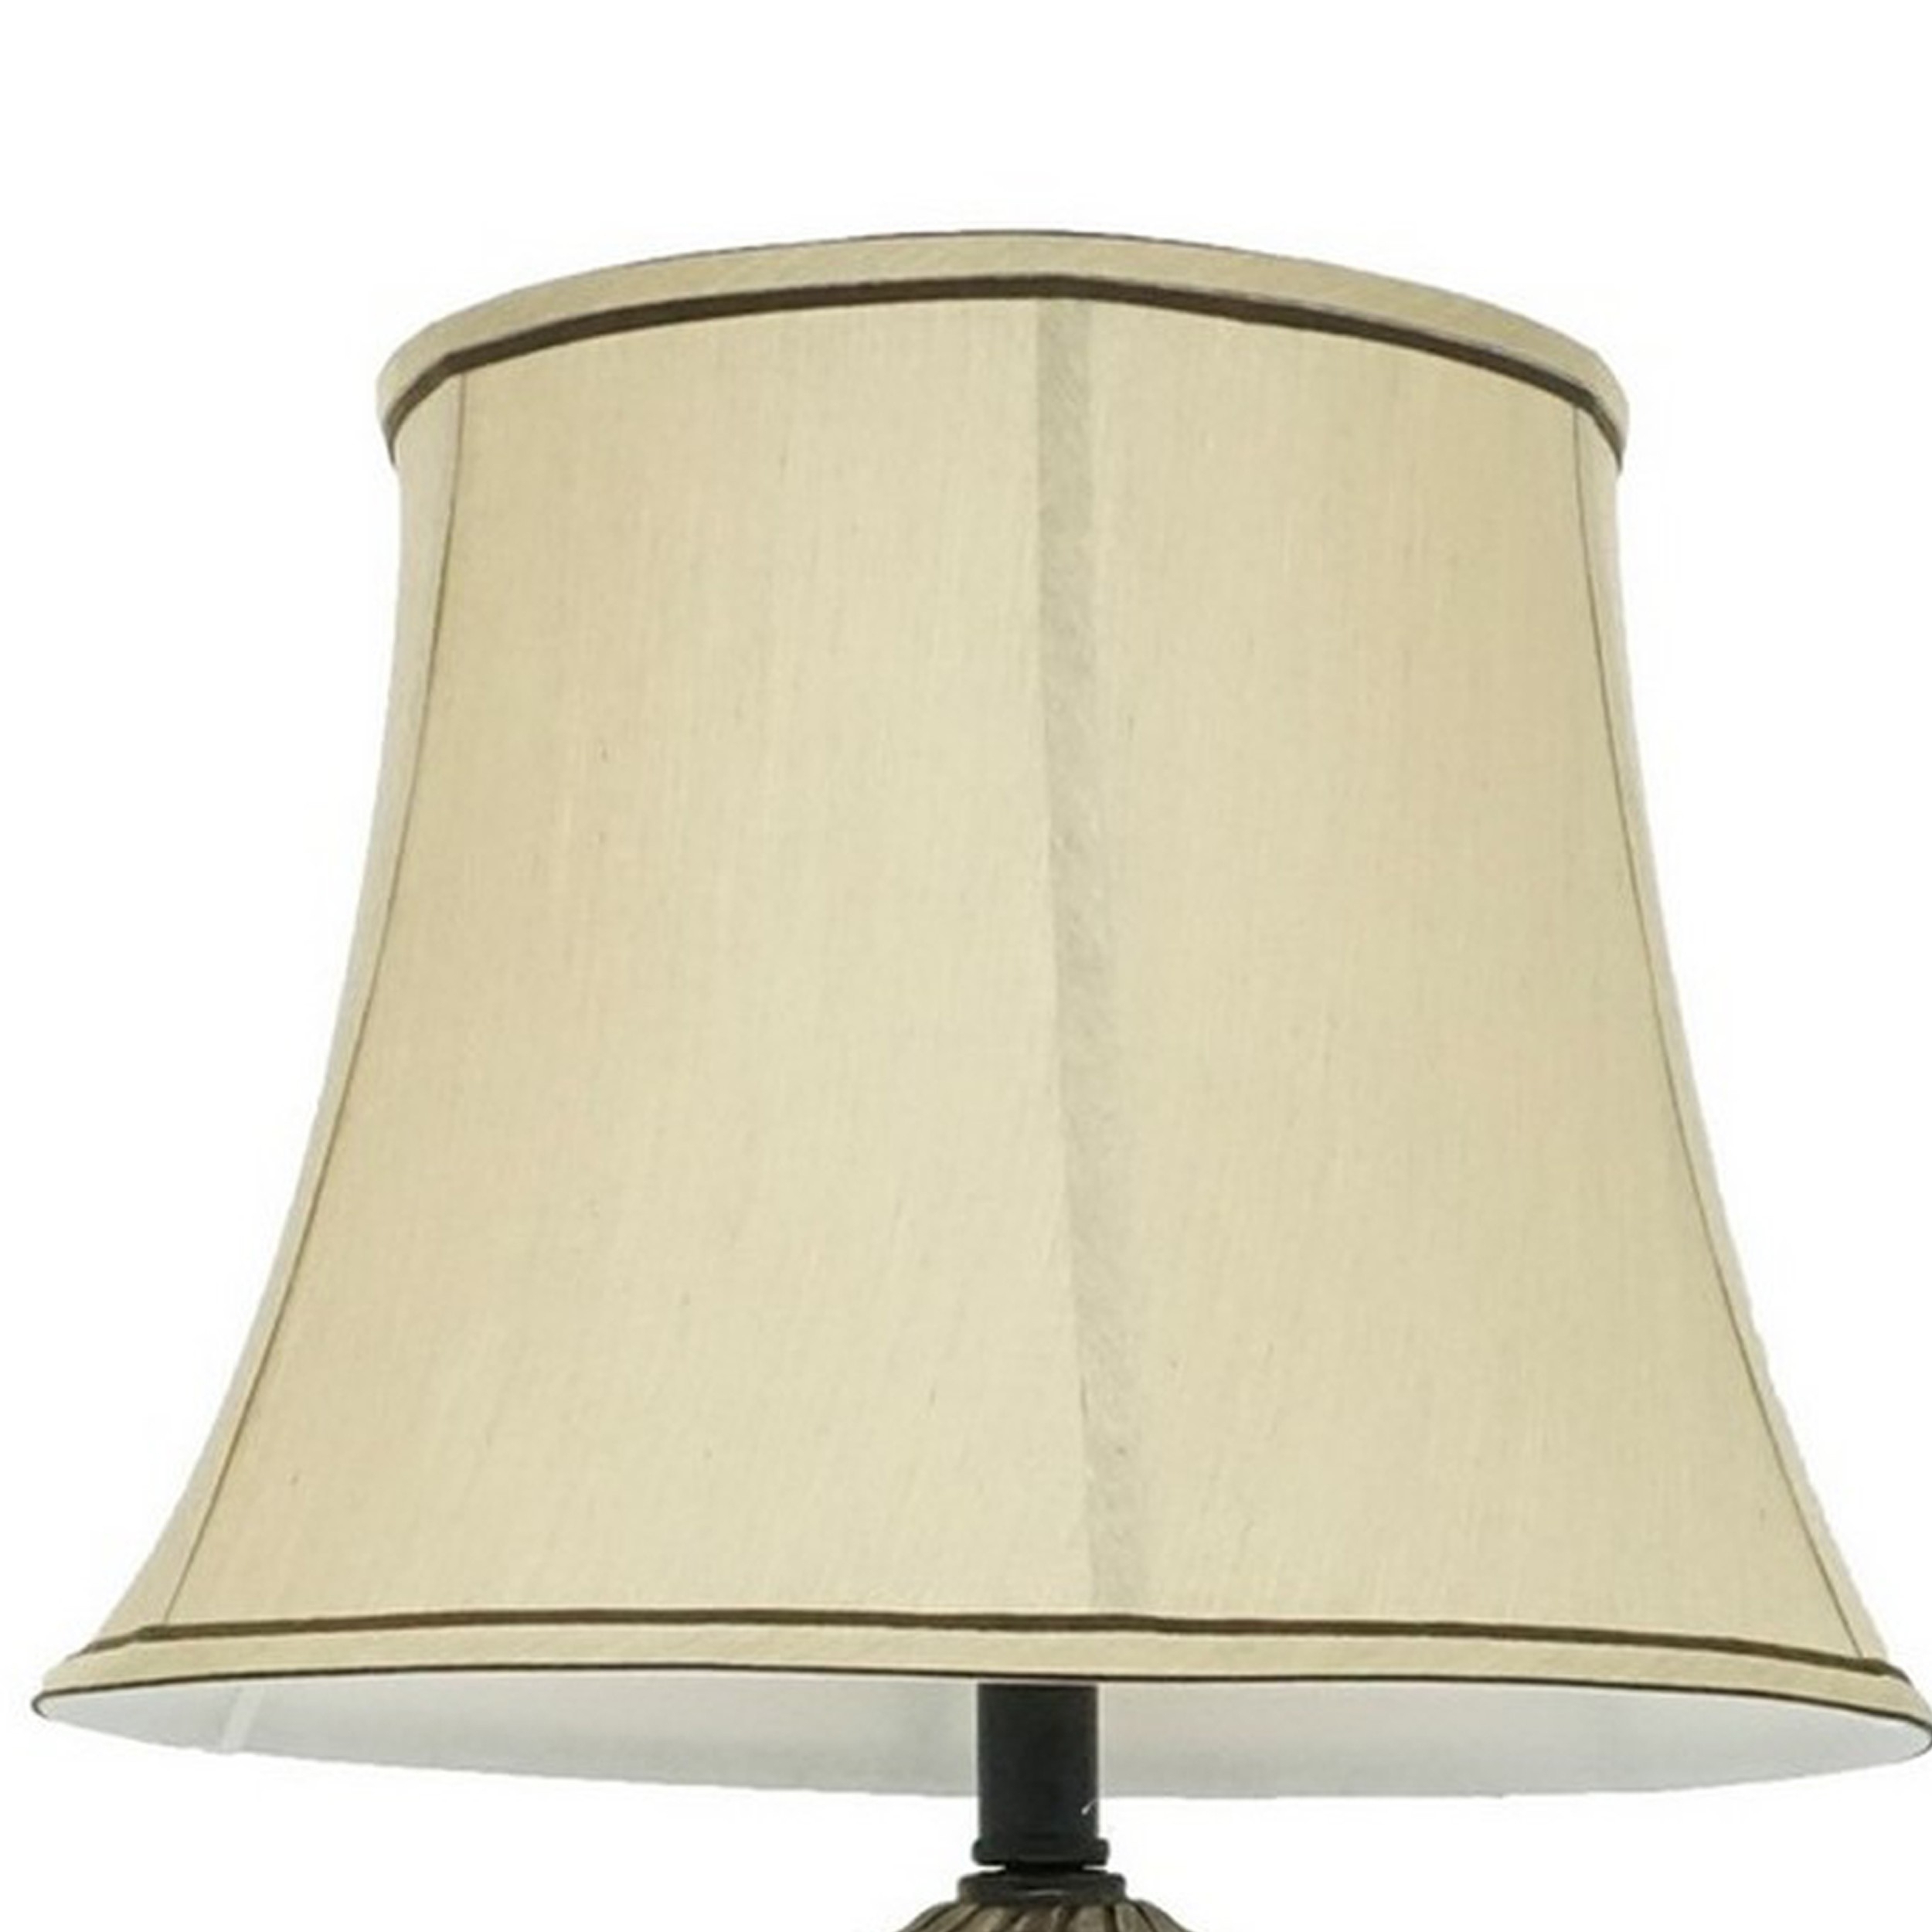 29 Inch Table Lamp, Traditional Round Beige Fabric Shade, Brown Plinth Base- Saltoro Sherpi